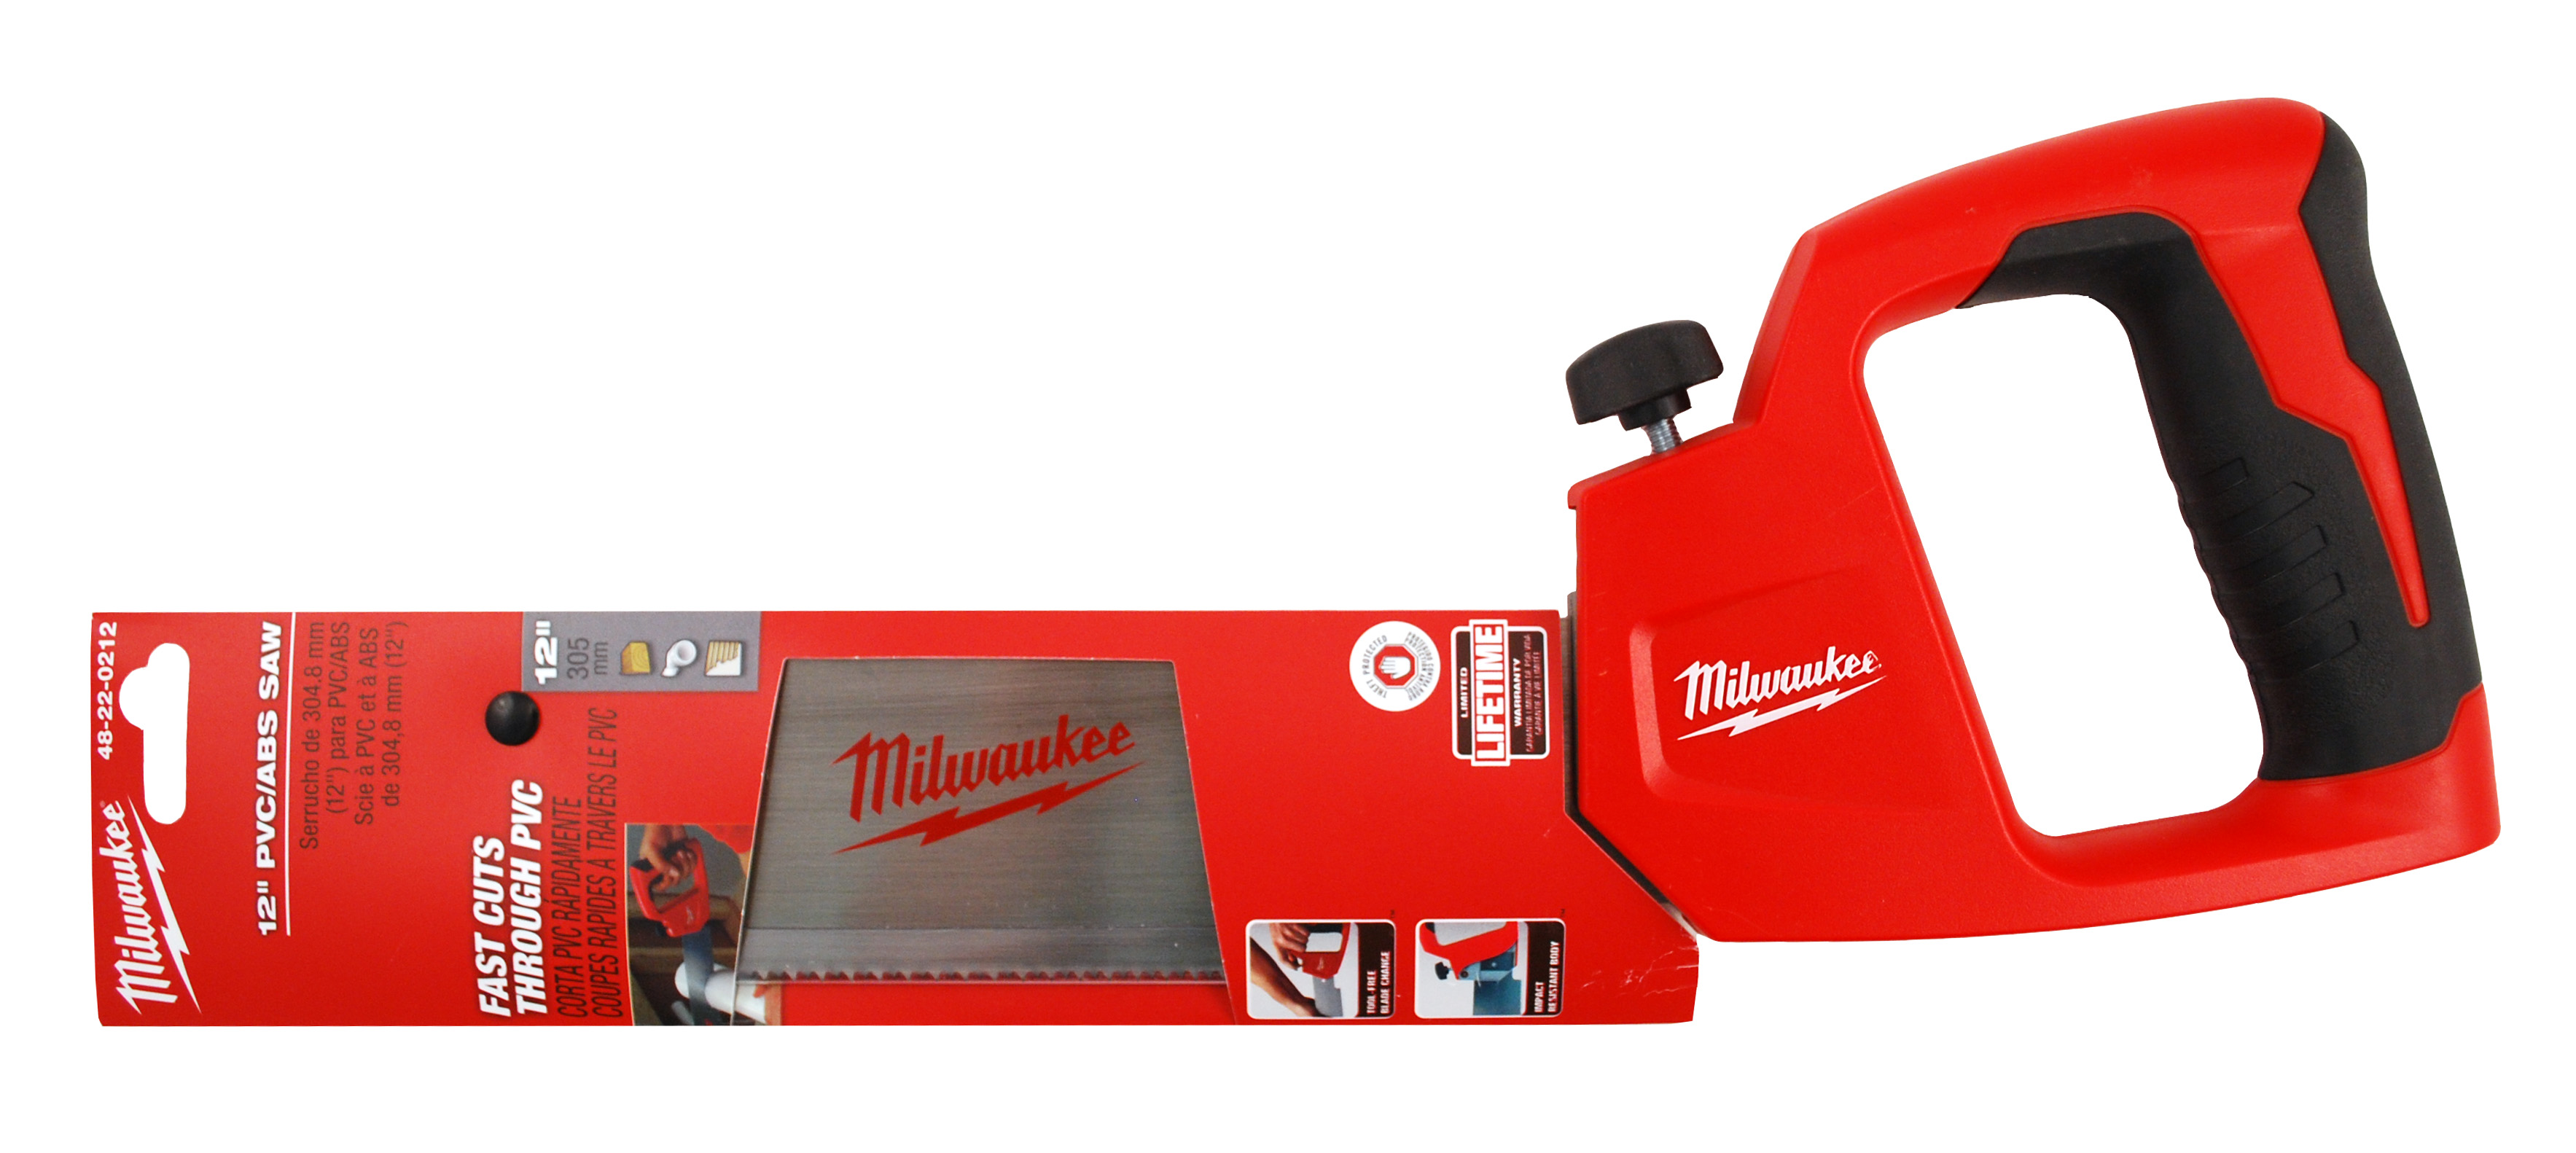 The Milwaukee 12 in. PVC/ABS saw features a tool free blade change to avoid downtime and increase efficiency in challenging applications. Complete with rubber over mold handle grip for comfort, the saw offers unmatched durability with a metal core body and clamshell handle design to prevent damage from the toughest jobsite conditions.